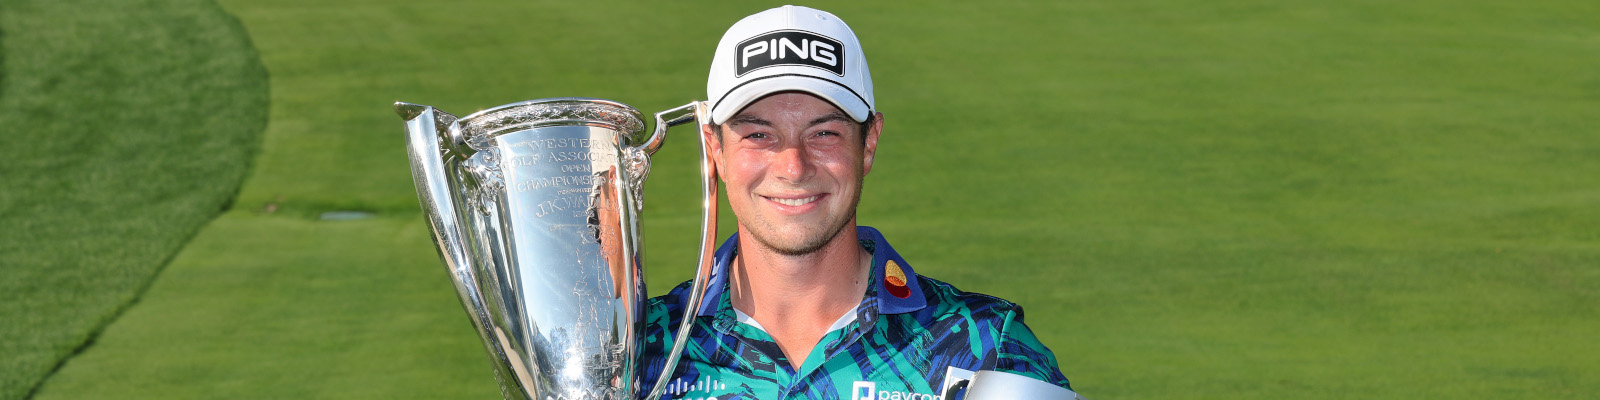 Viktor Hovland (Photo by Michael Reaves/Getty Images)